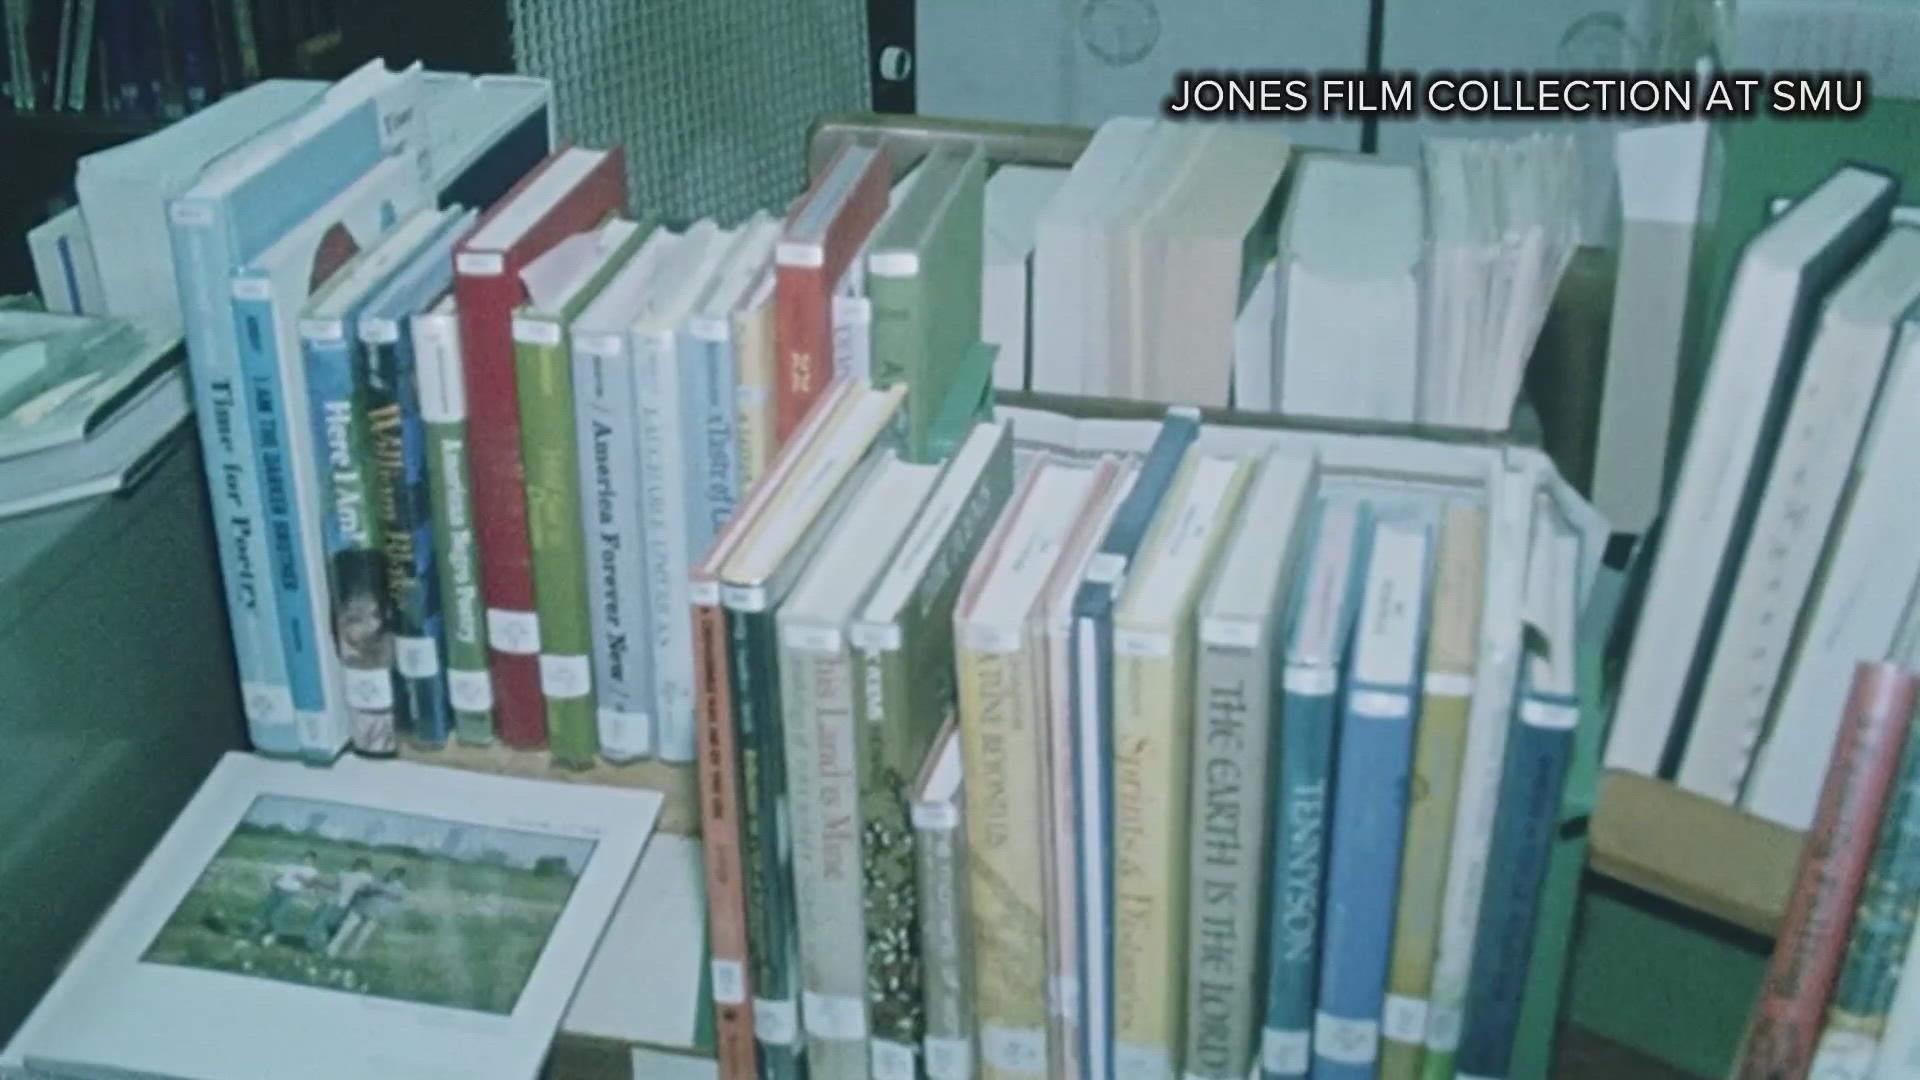 A 1975 WFAA story archived in the SMU Jones Film Collection focused on seven books that received objections at the state level.